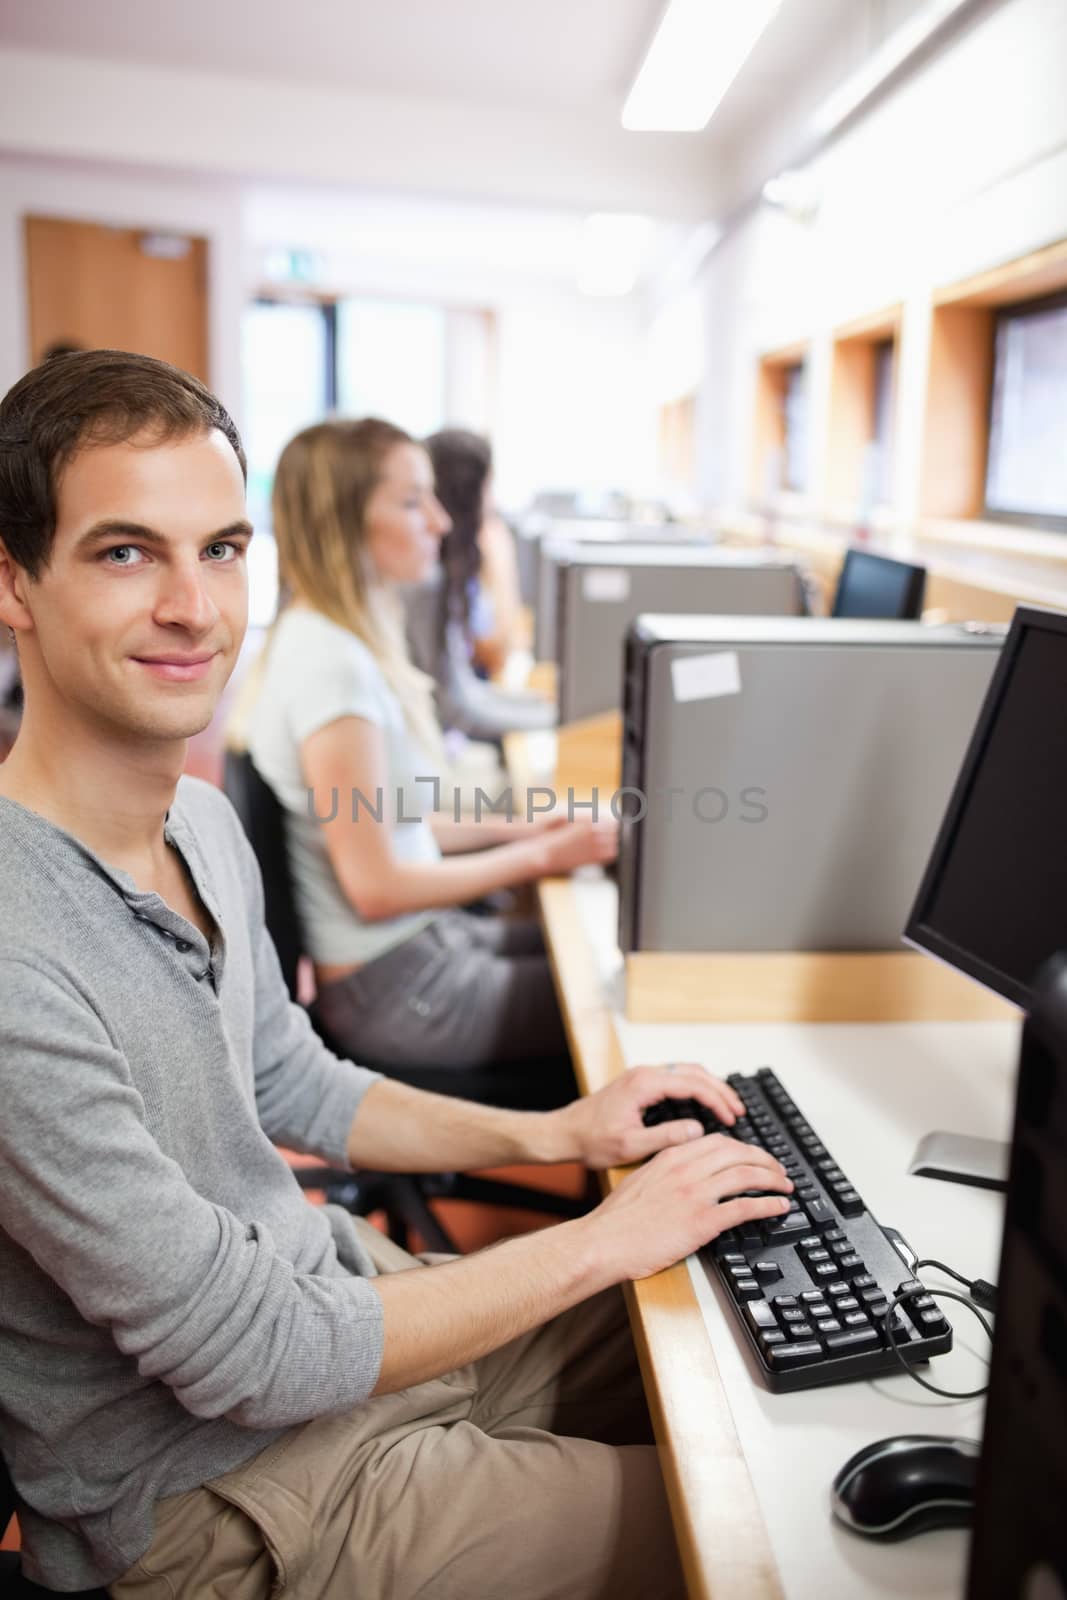 Portrait of a young male student posing with a computer in an IT room